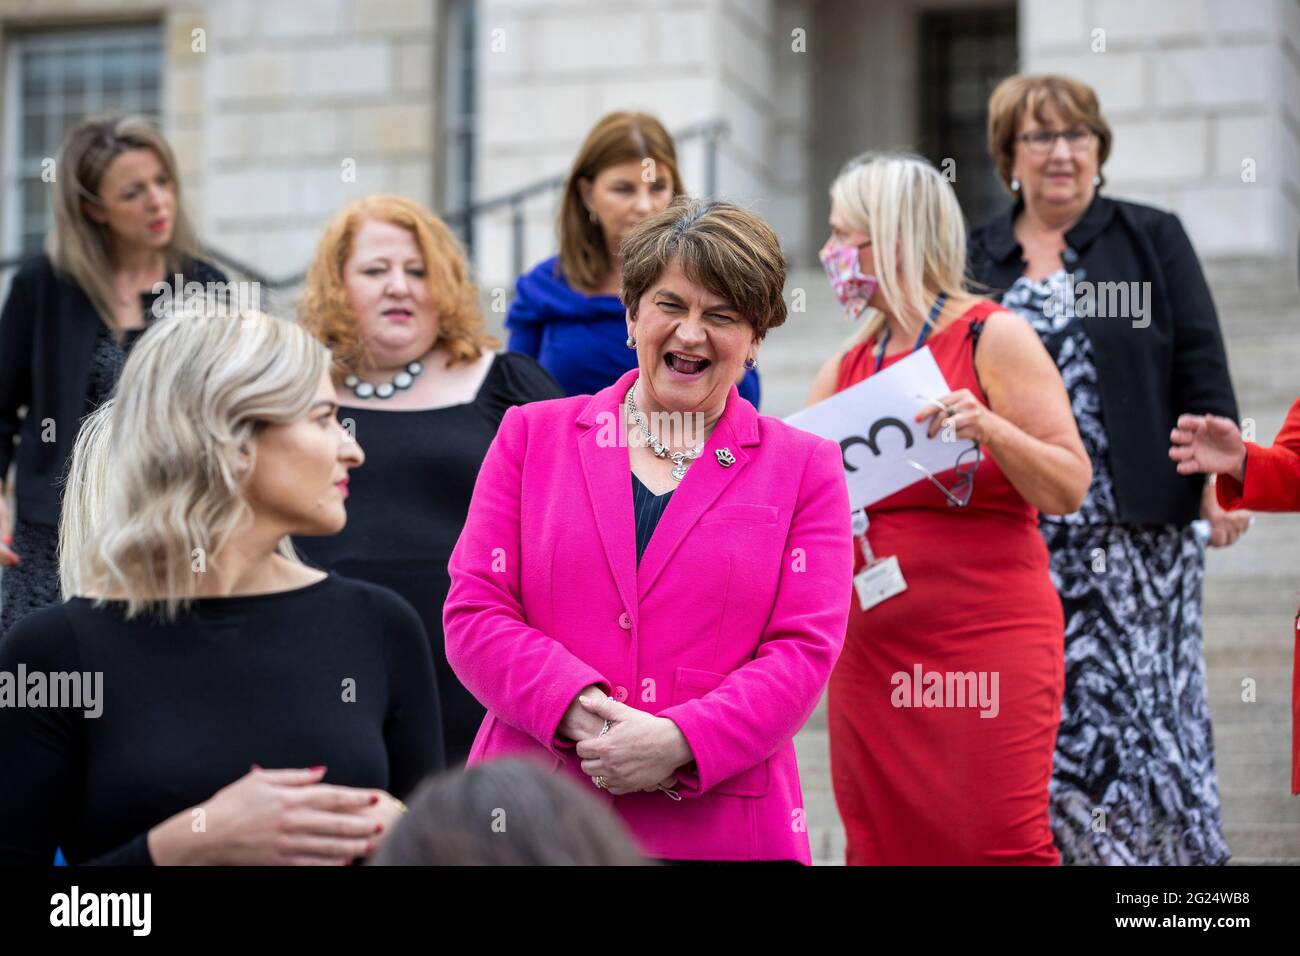 Former DUP leader Arlene Foster (pink blazer) interacts with MLA's during a photocall for female MLA's on the steps of Parliament Buildings at Stormont. Stock Photo